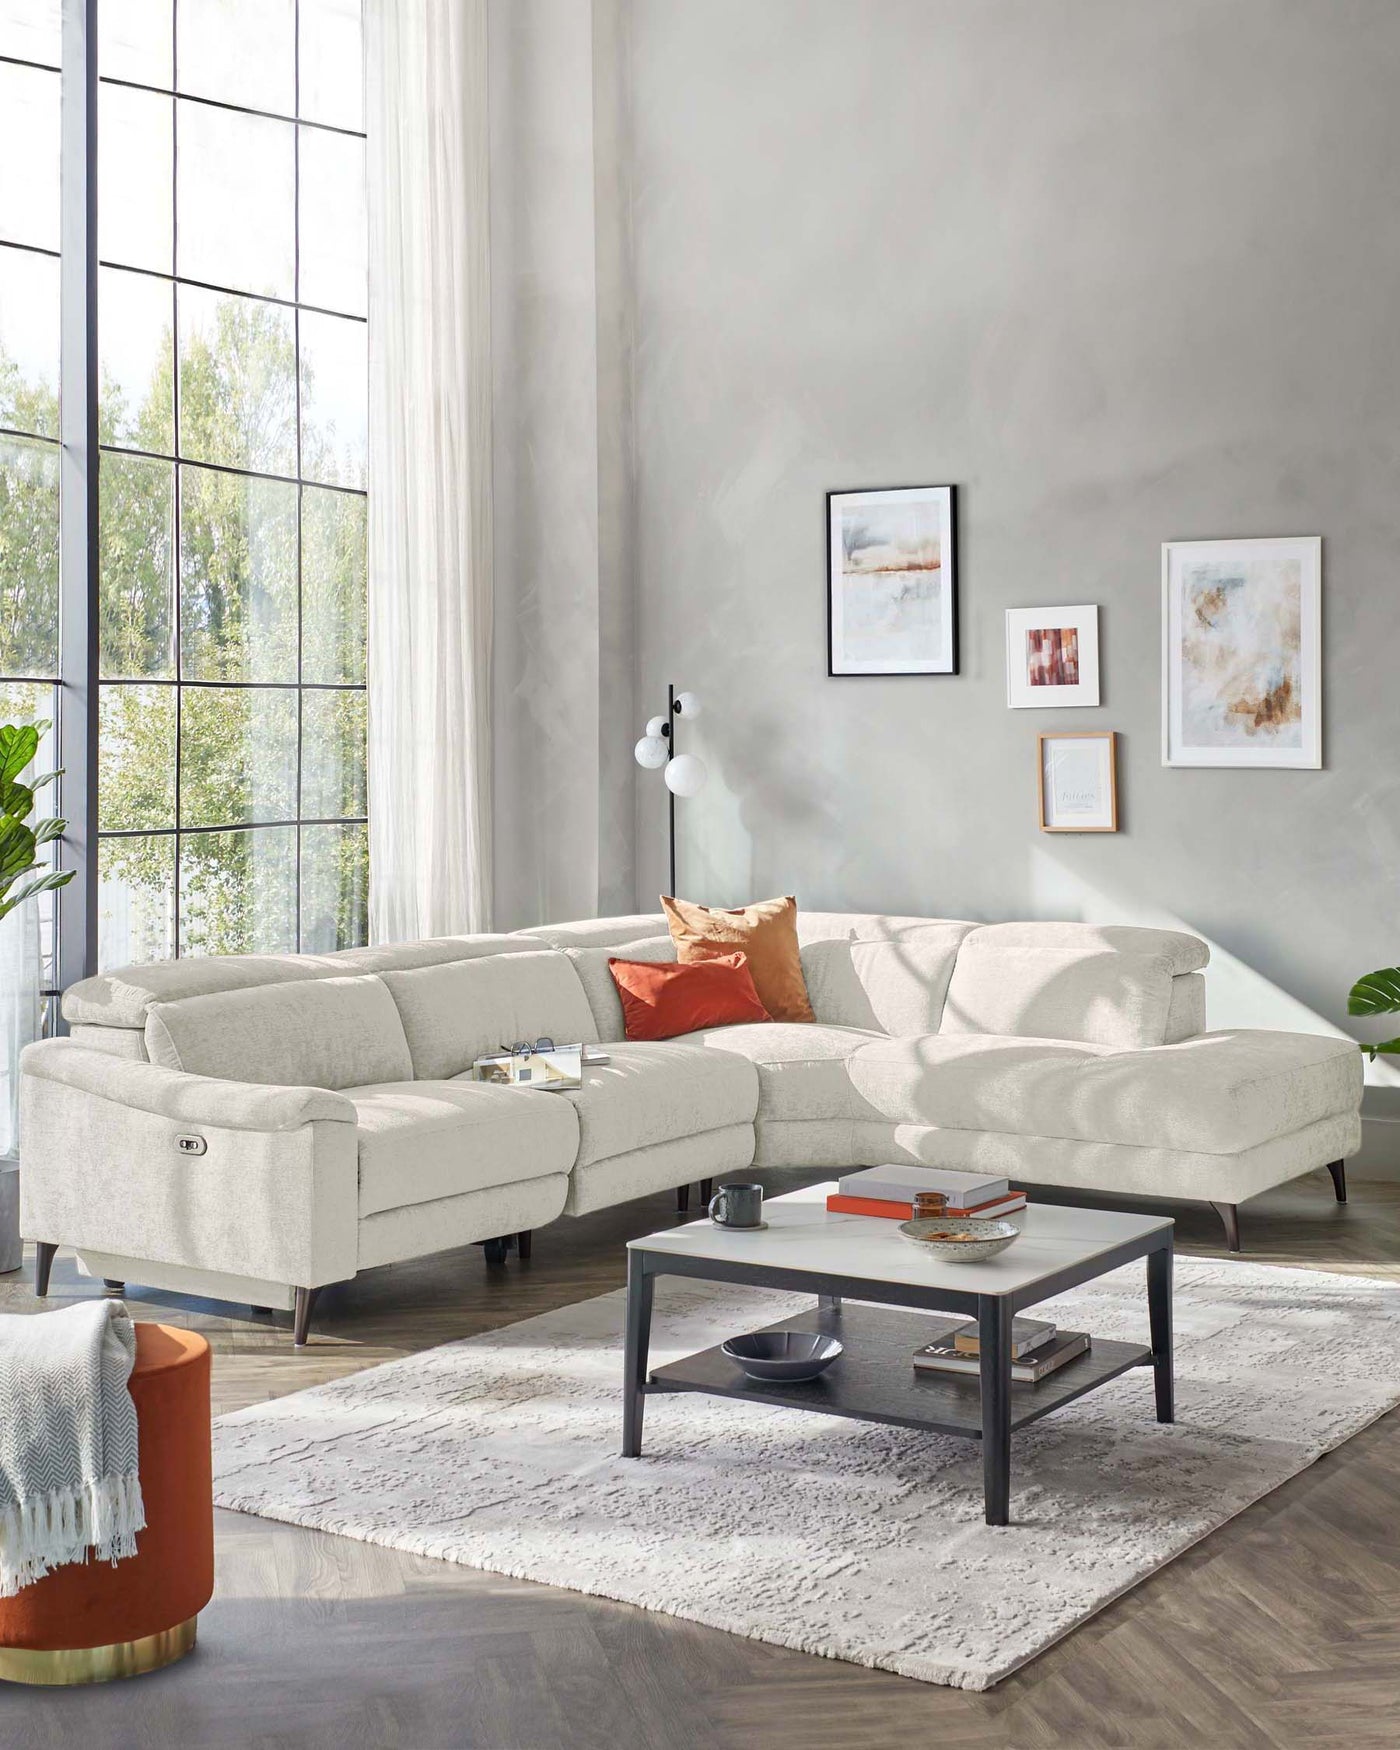 Modern light grey sectional sofa with chaise on the left and plush back cushions, paired with a geometric black metal and wood coffee table on a soft textured area rug. In the corner, a round burnt orange side table with a metallic base complements the setting.